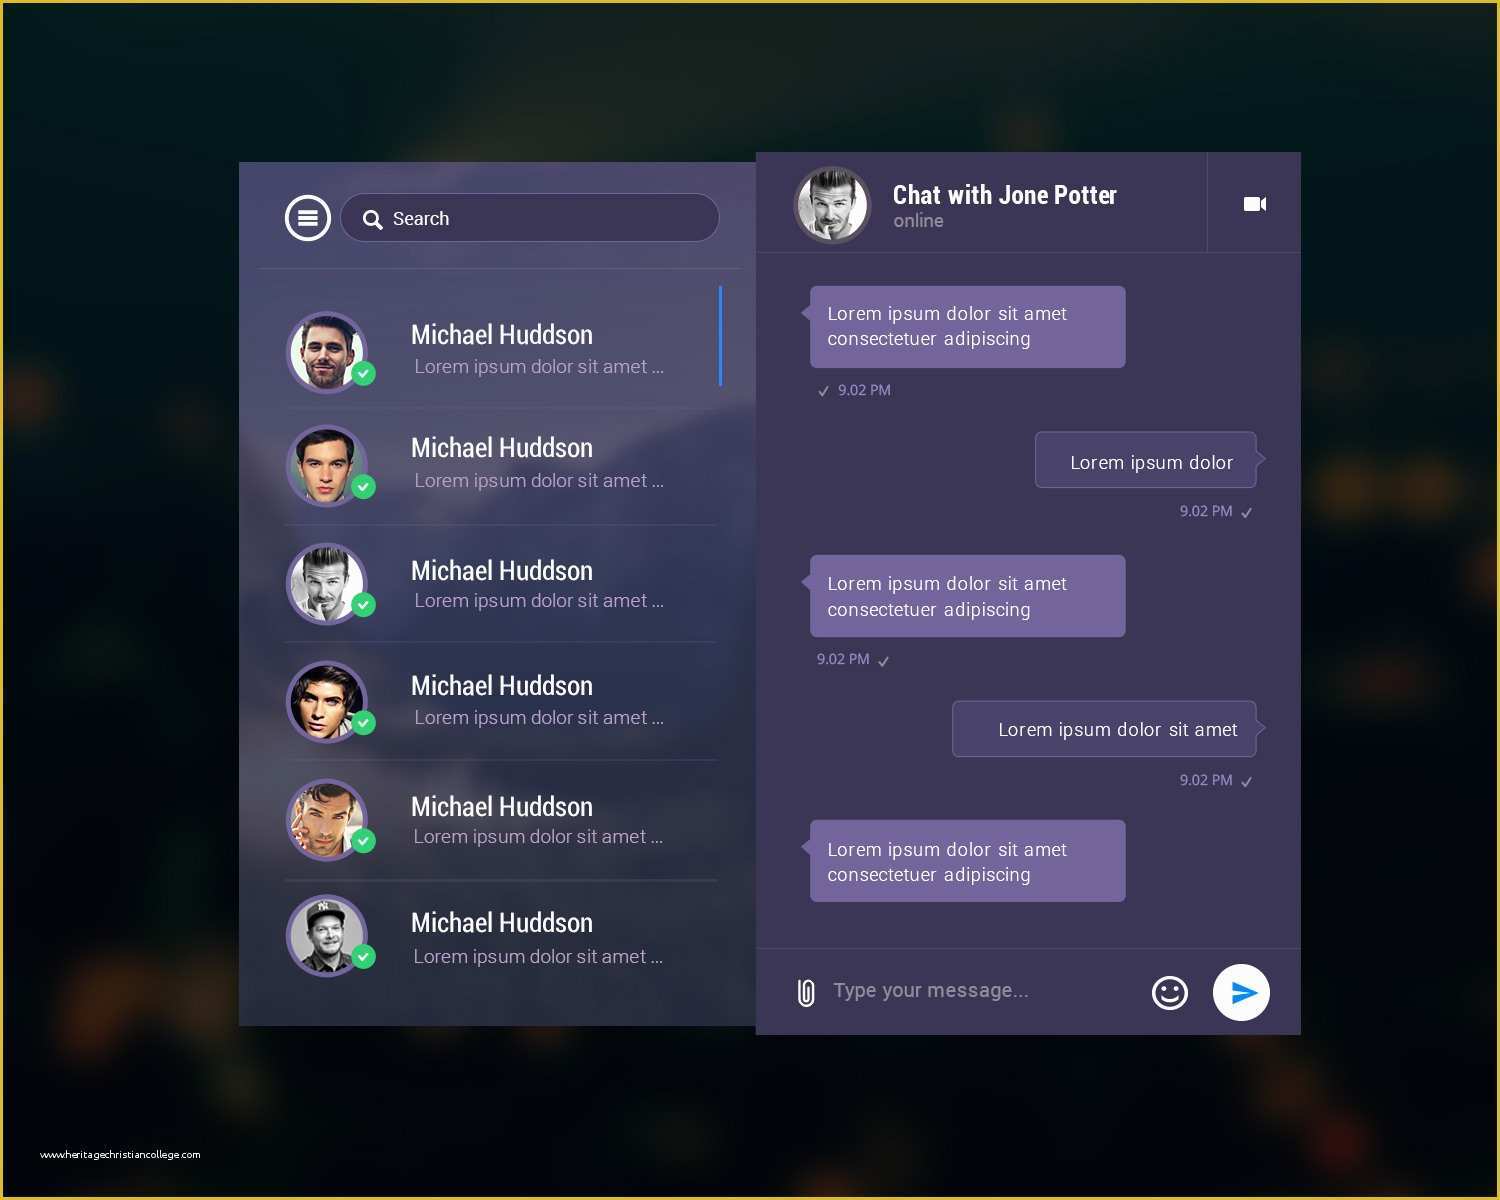 Free Chatting Website Templates Of Instant Mobile Chat Messenger App Ui Free Psd 72pxdesigns